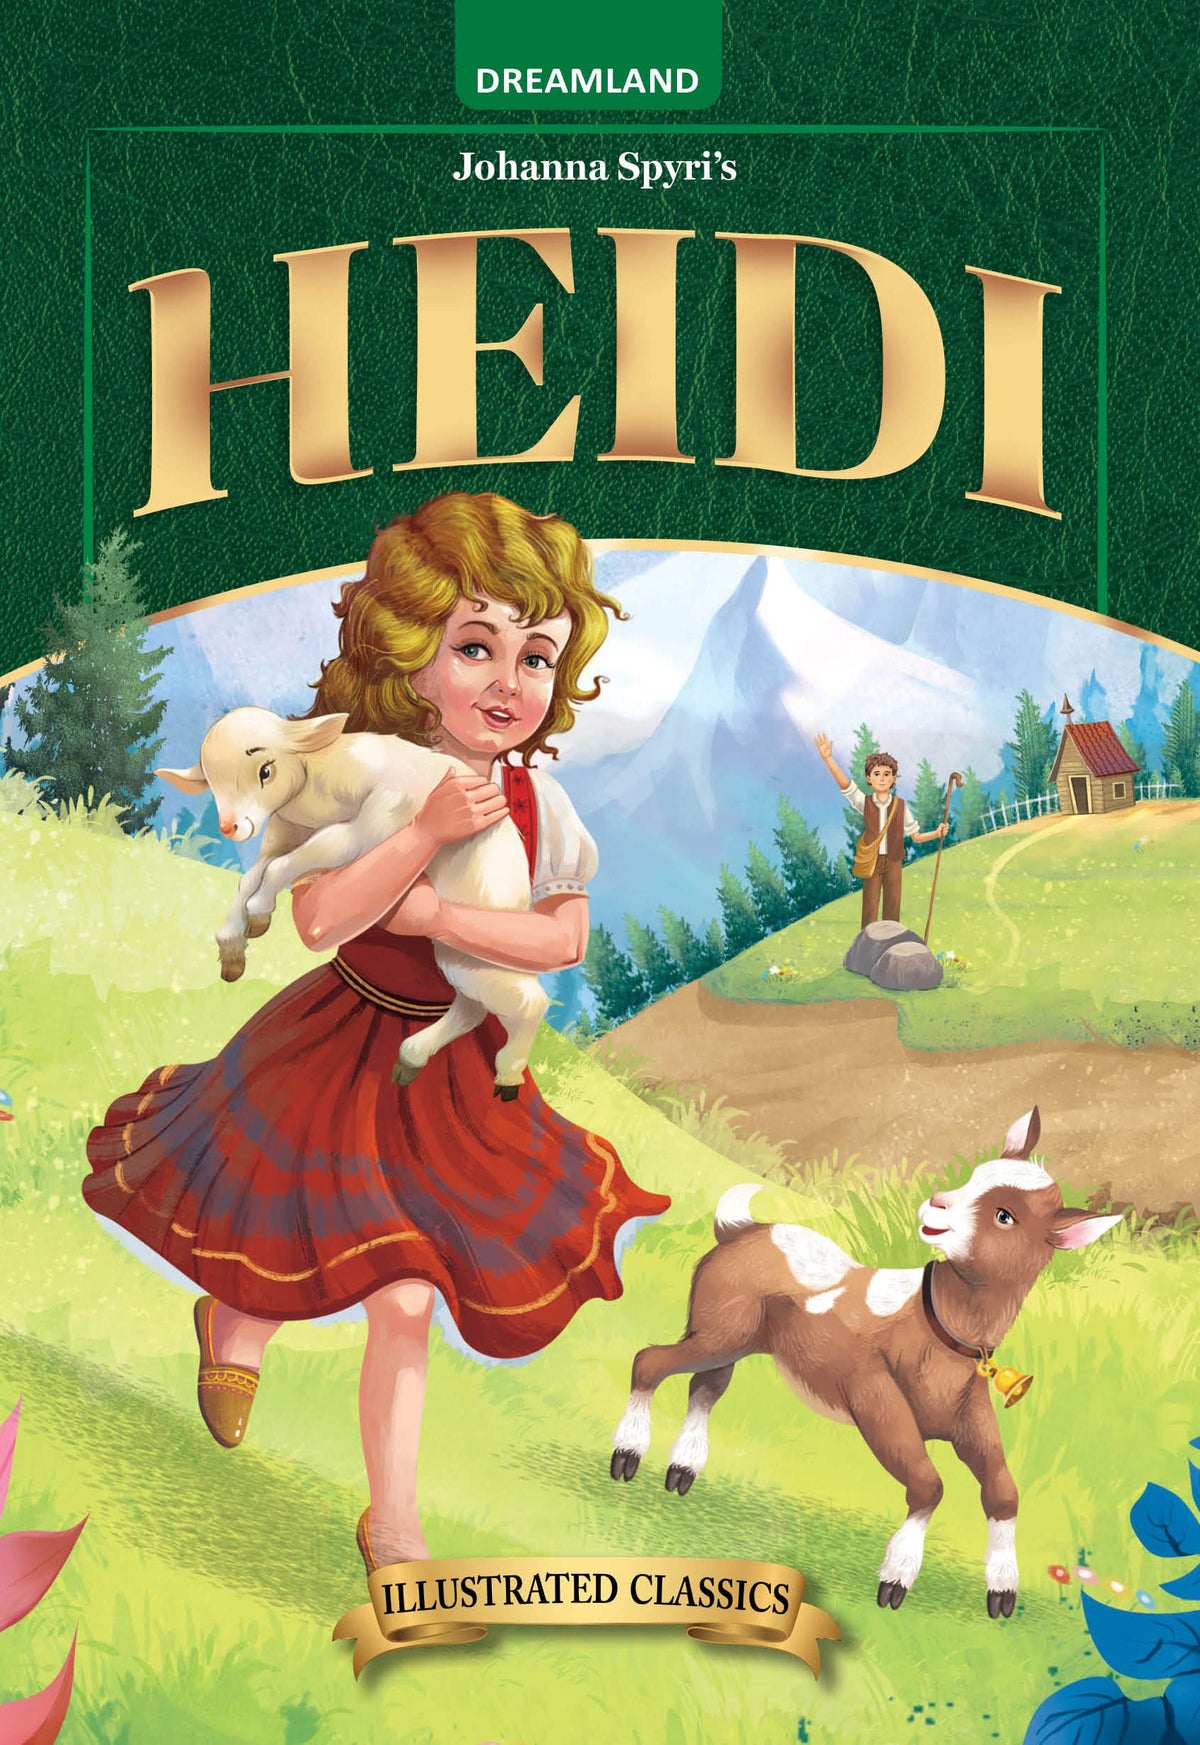 Dreamland Classic Tales Heidi - llustrated Abridged Classics for Children with Practice Questions